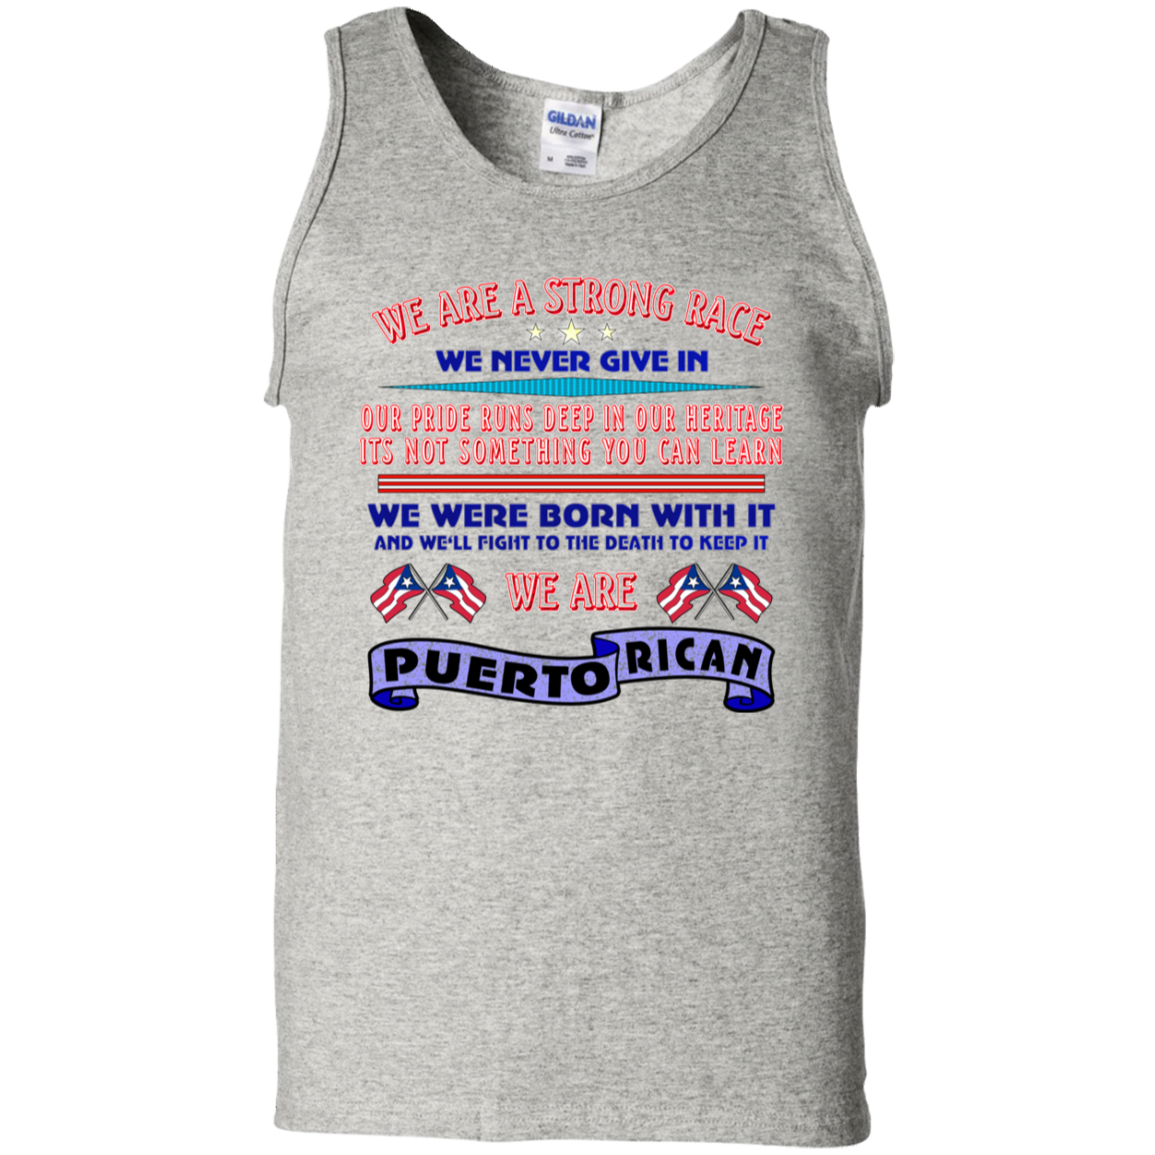 WE ARE Strong 100% Cotton Tank Top - Puerto Rican Pride